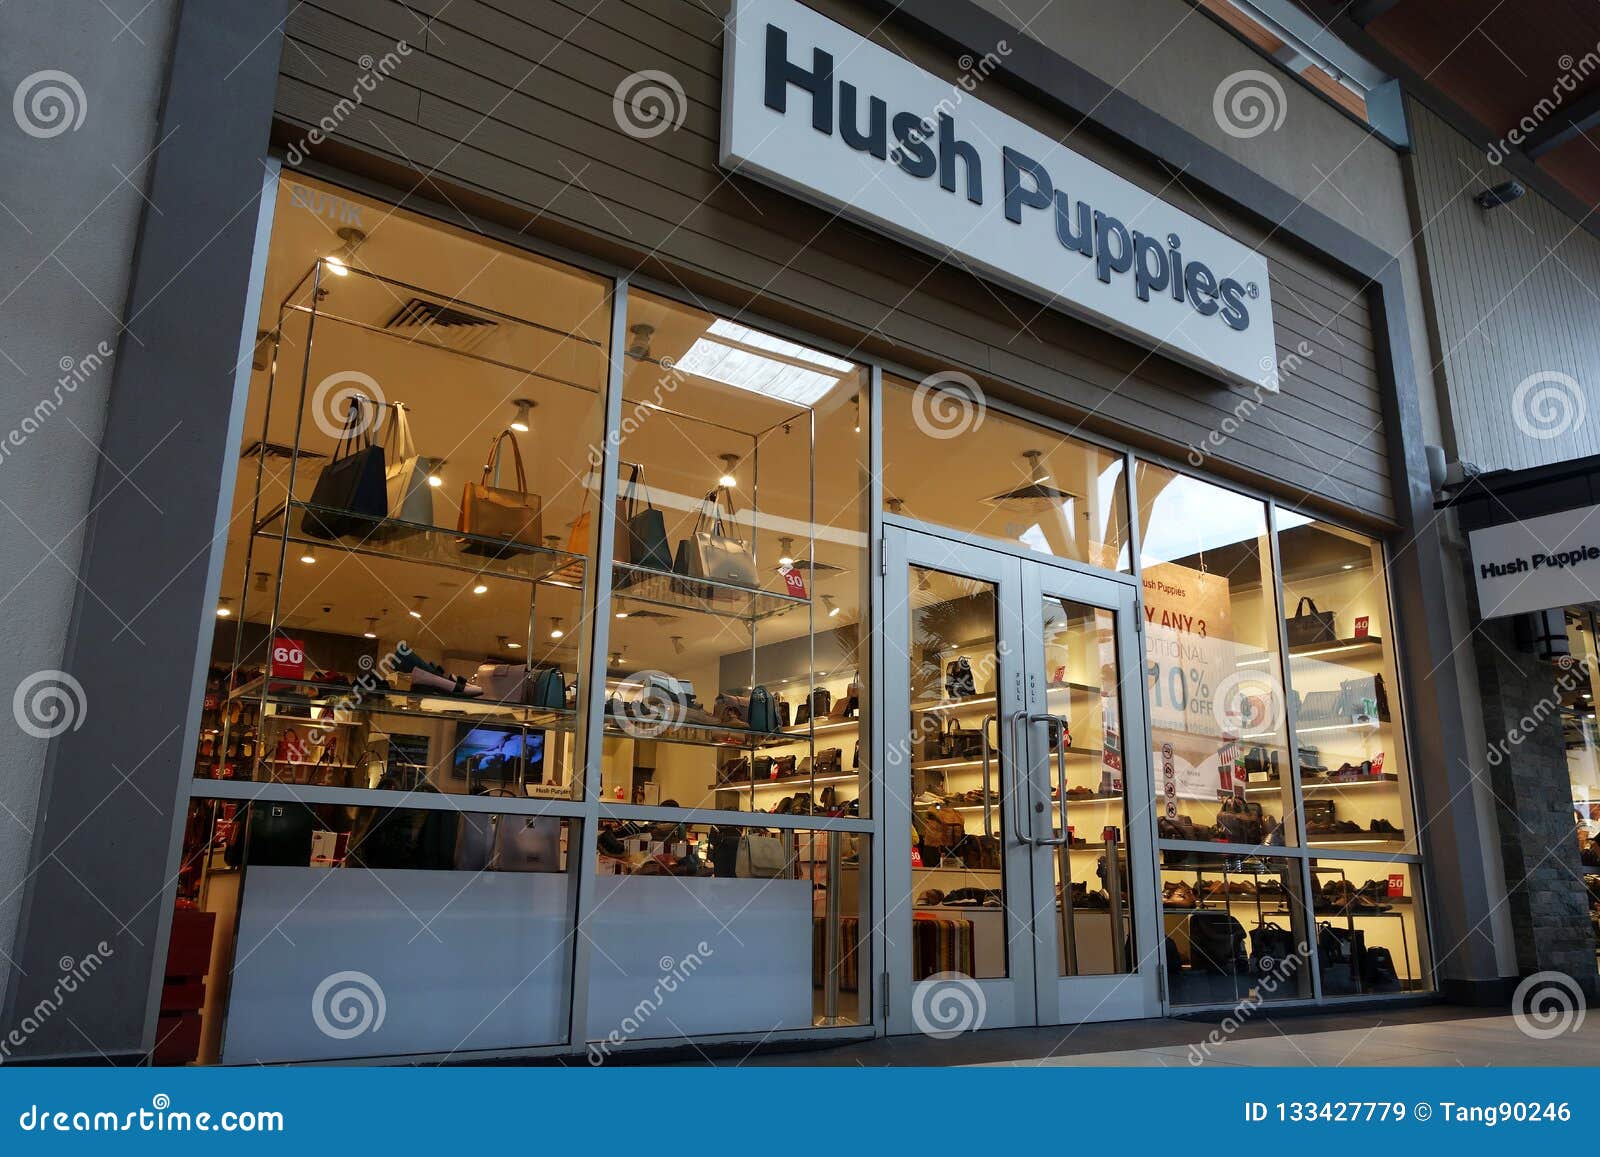 hush puppies outlet locations